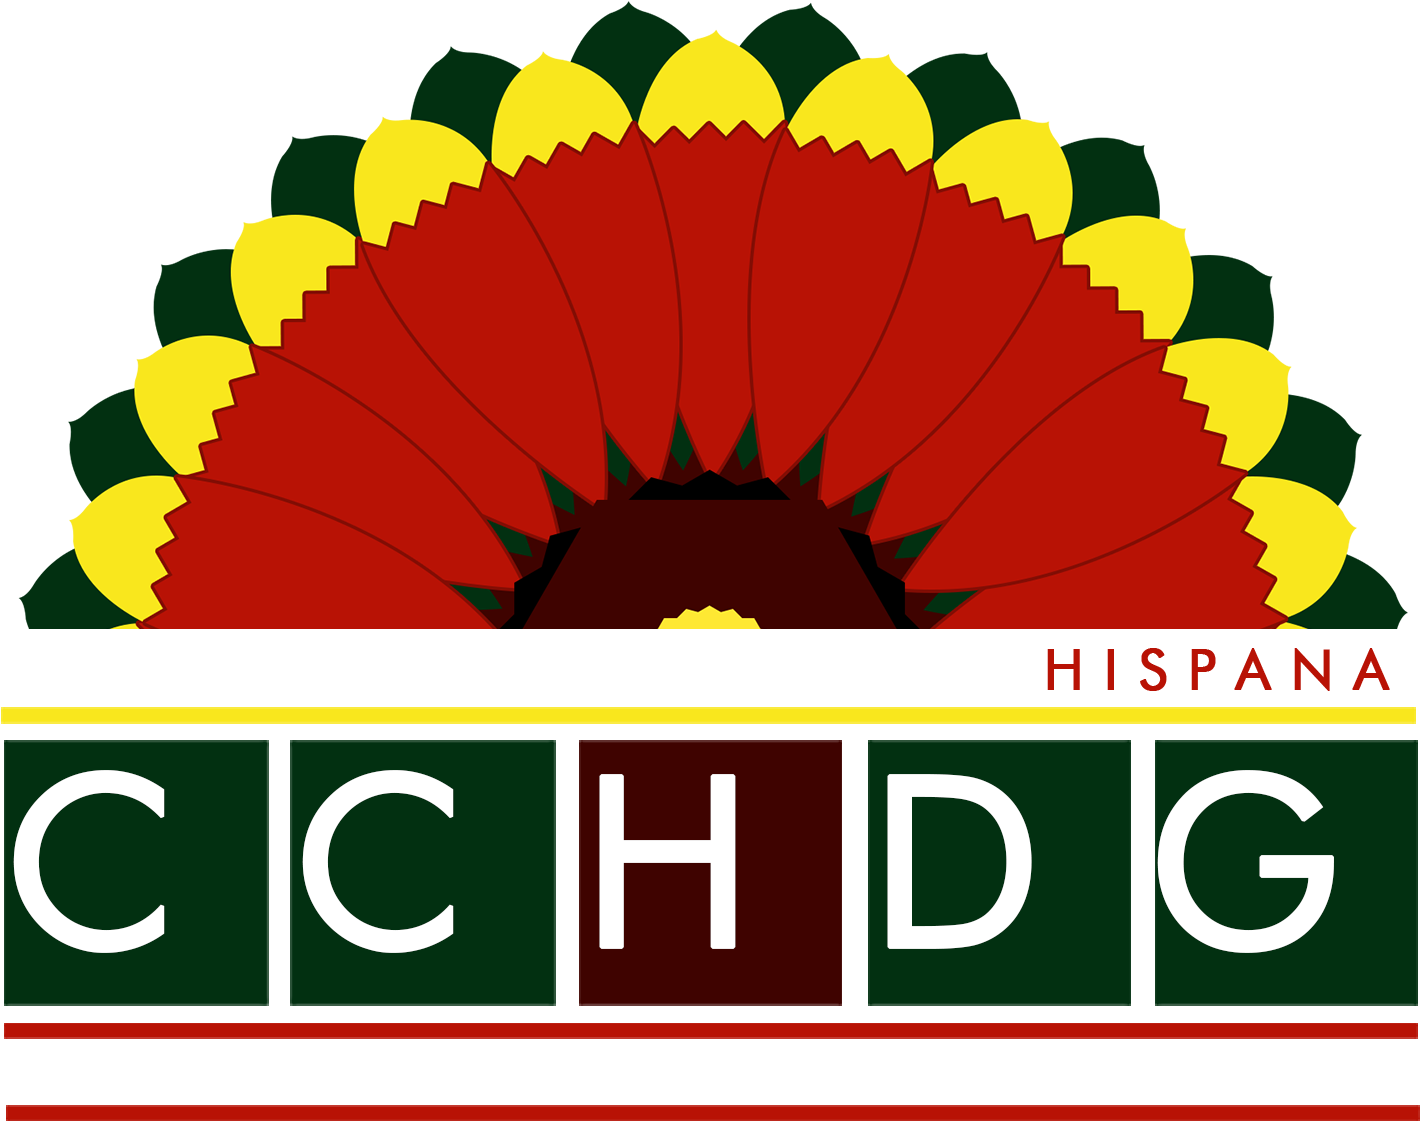 Garland Hispanic Chamber Of Commerce 501 - Self Assembly And Drug Delivery (1479x1161)